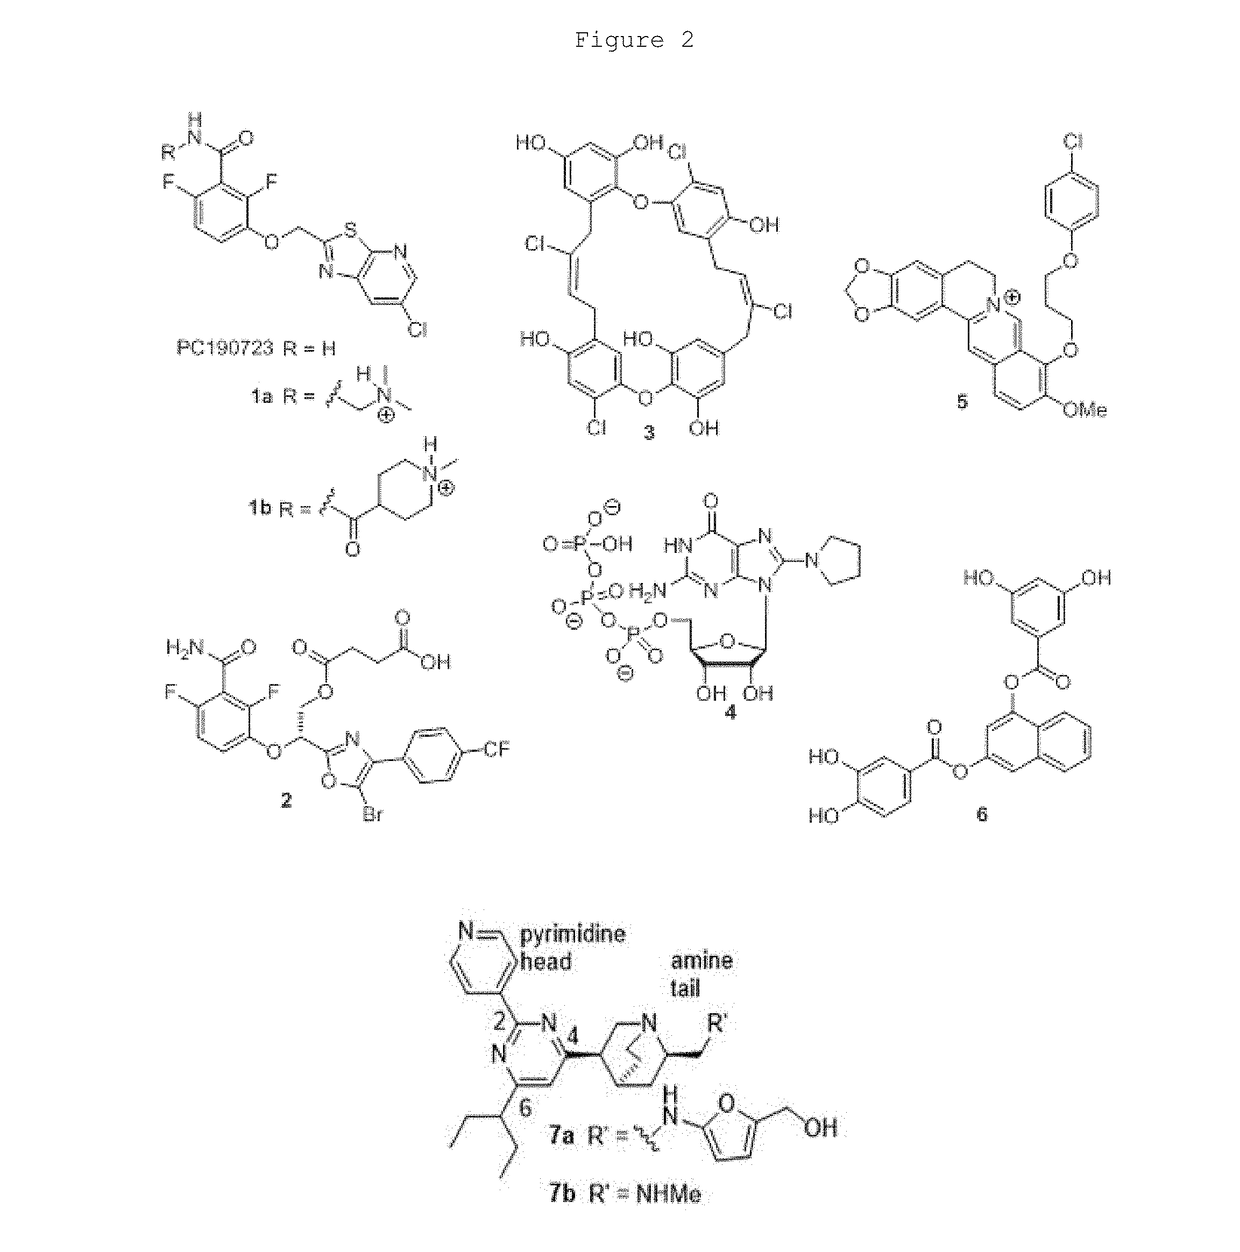 Pyrimidines for treatment of bacterial infections